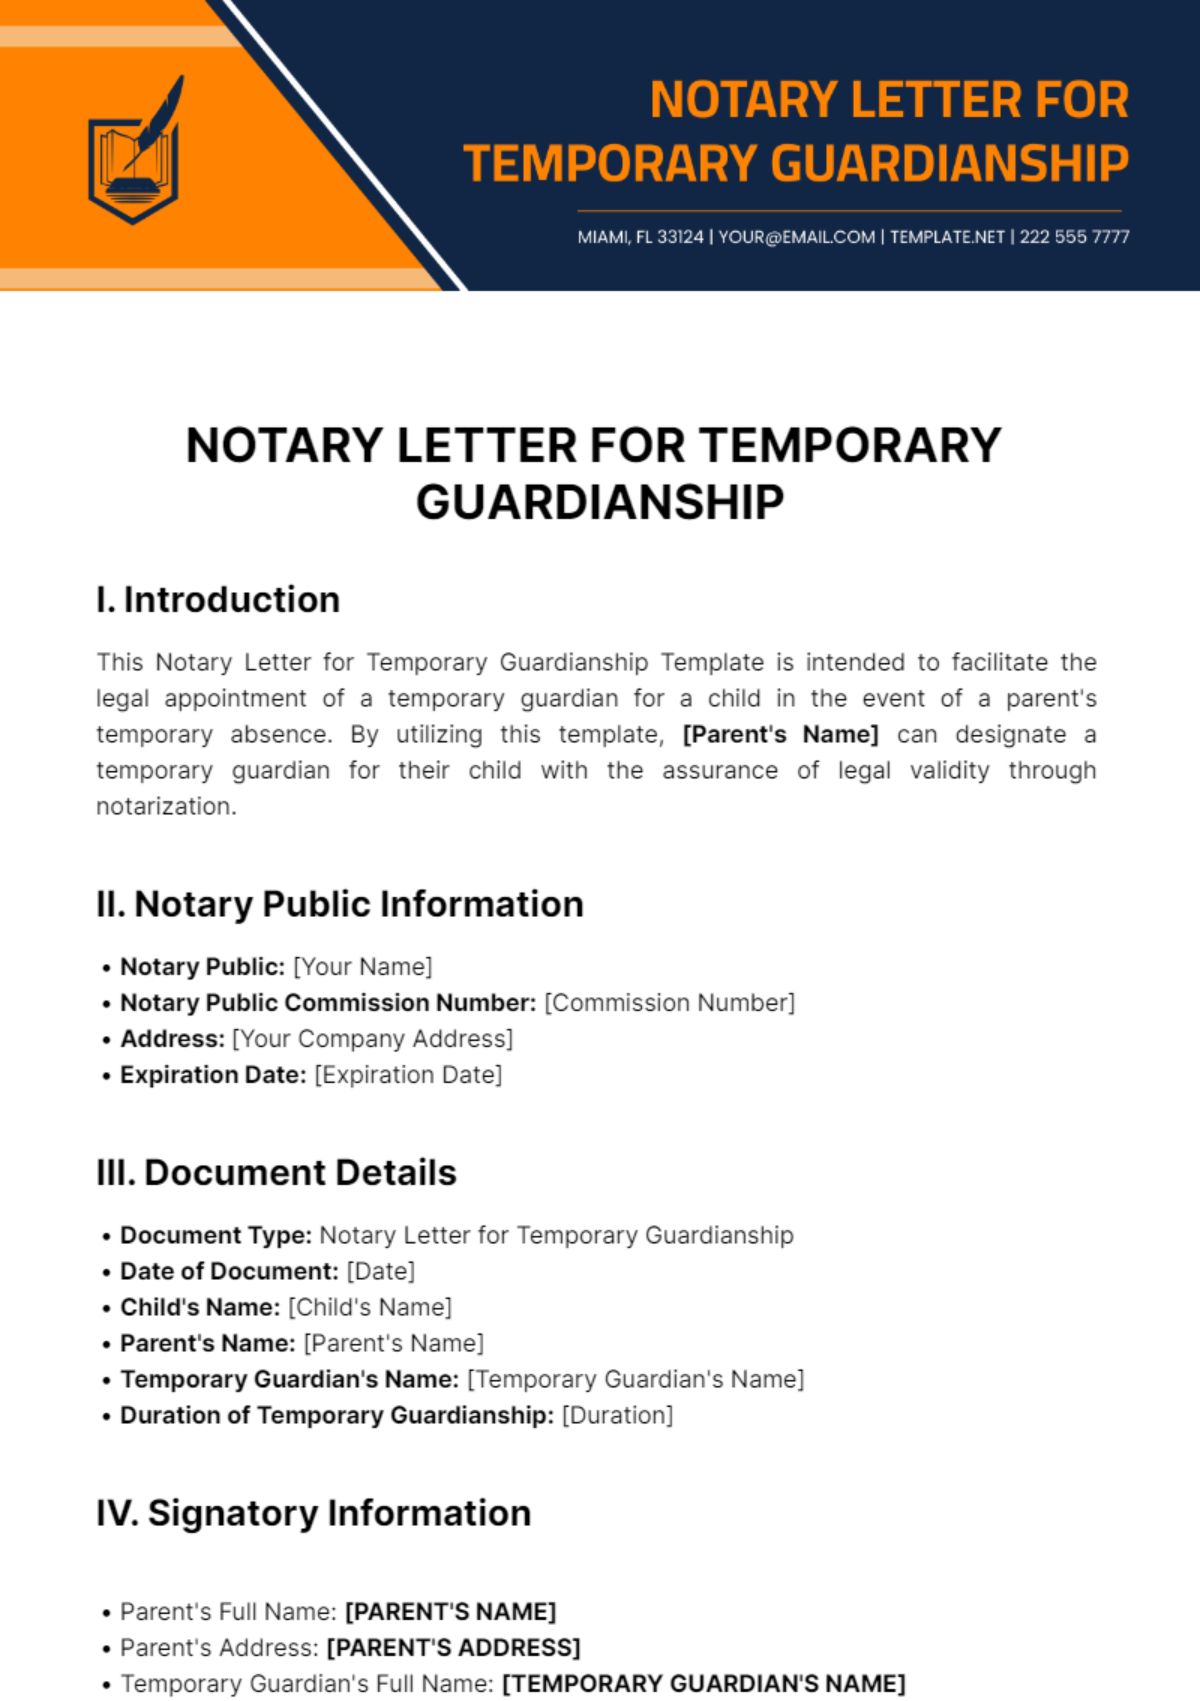 Free Notary Letter for Temporary Guardianship Template